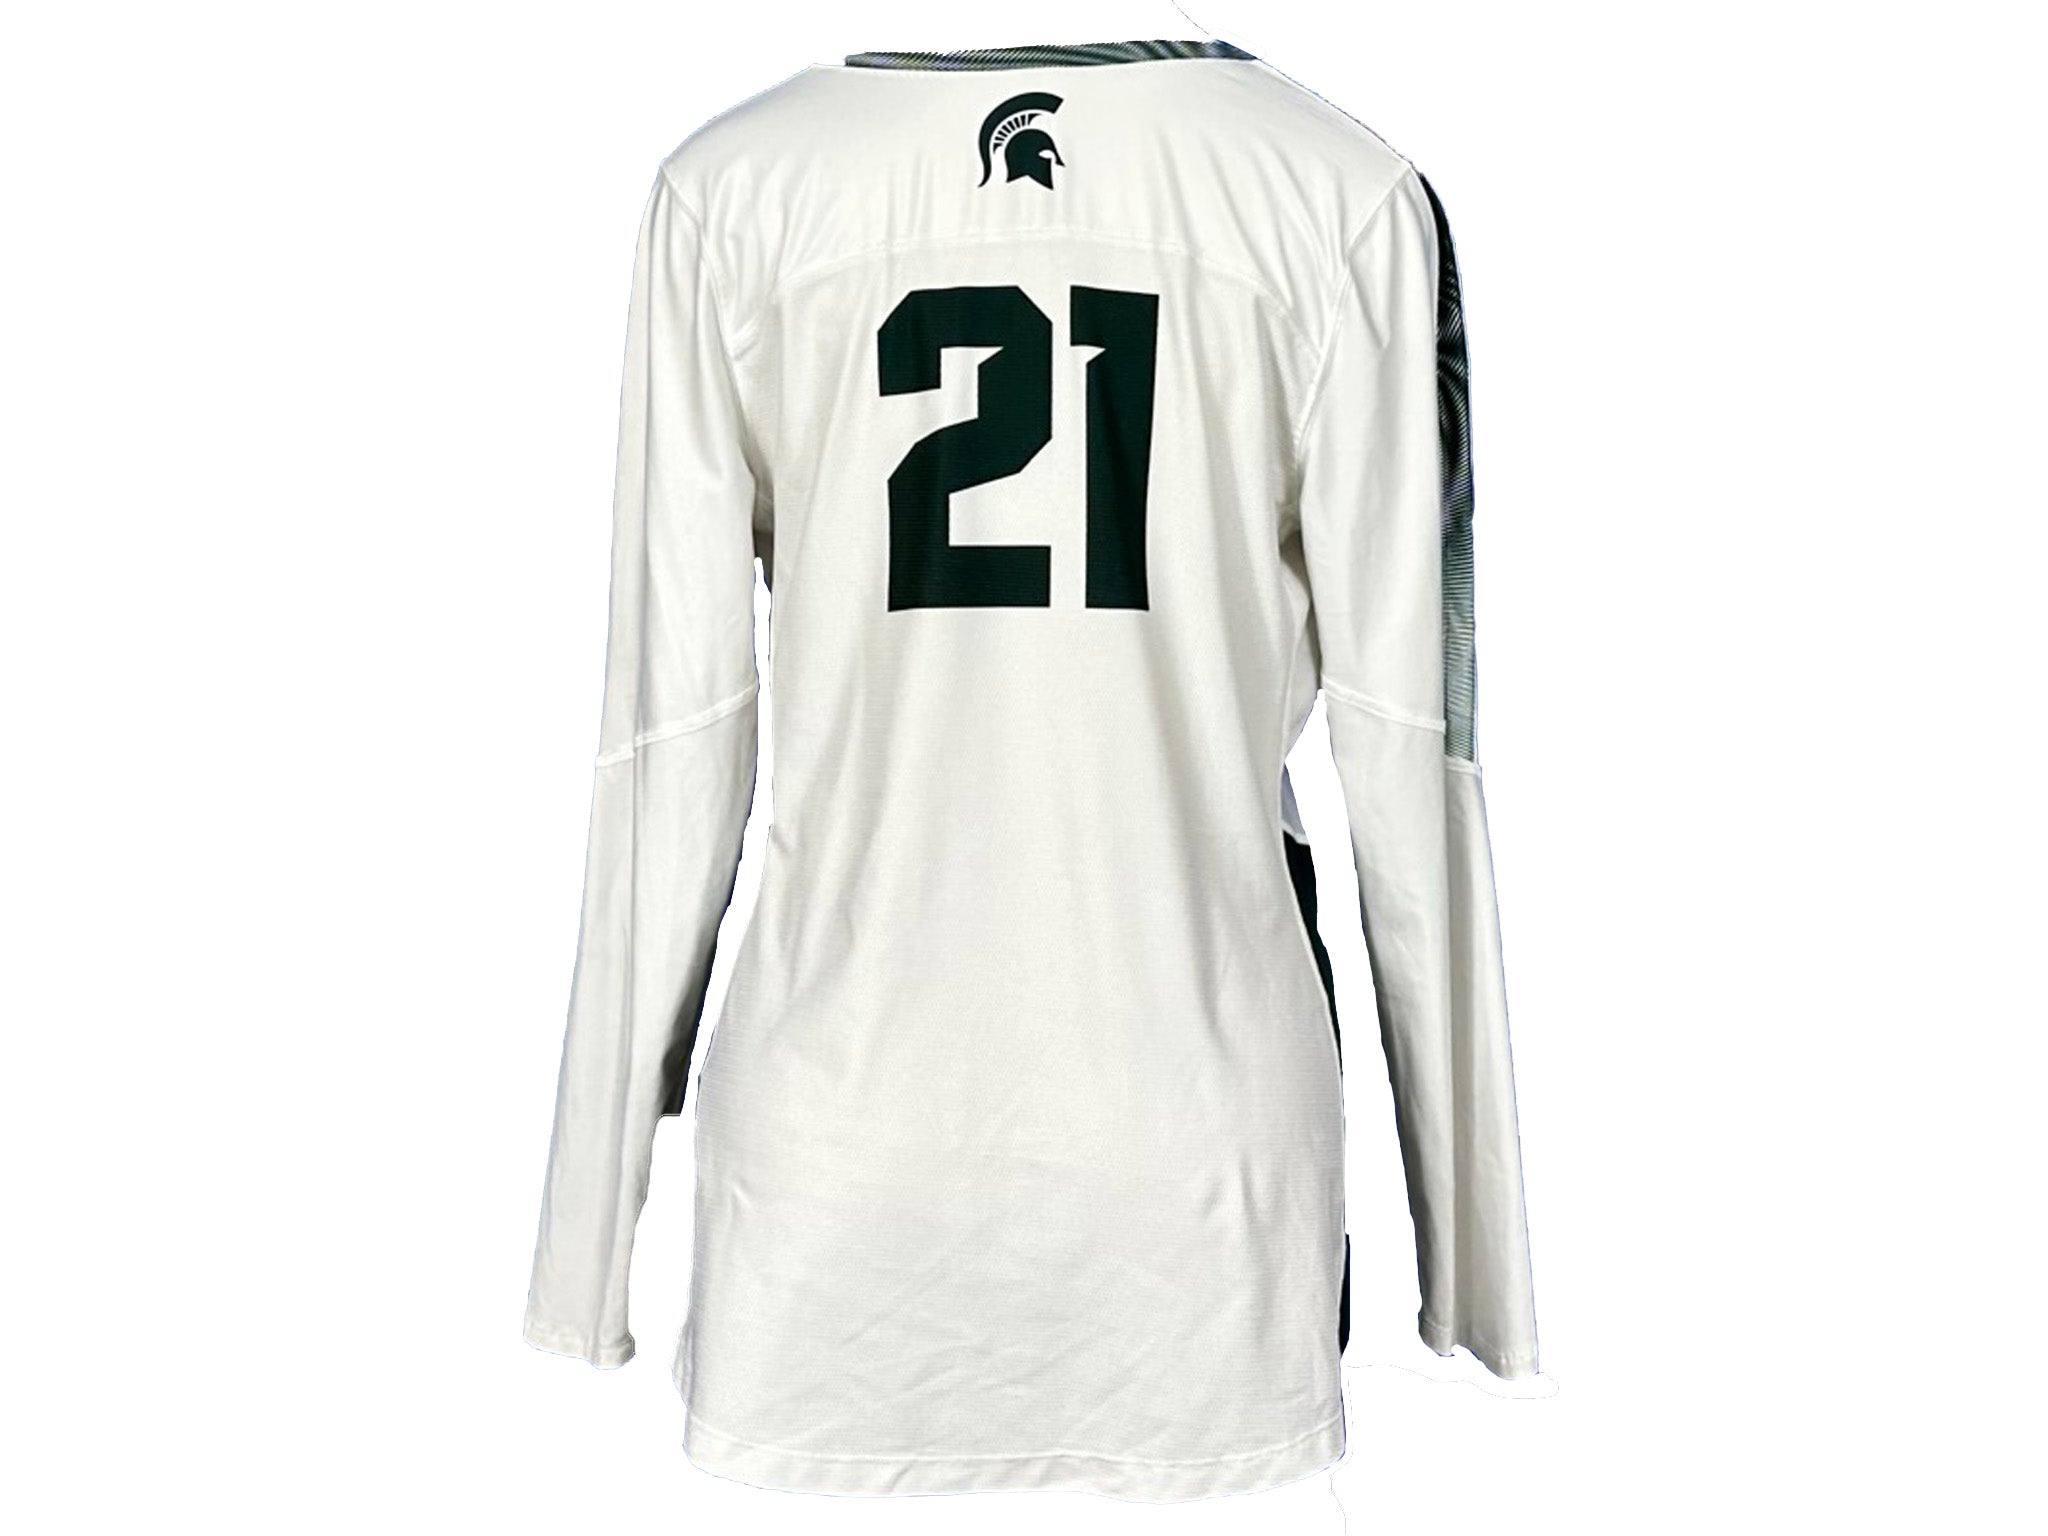 Nike White 2018-2021 Long Sleeve Volleyball Jersey #21 w/ Patch Women's Size L